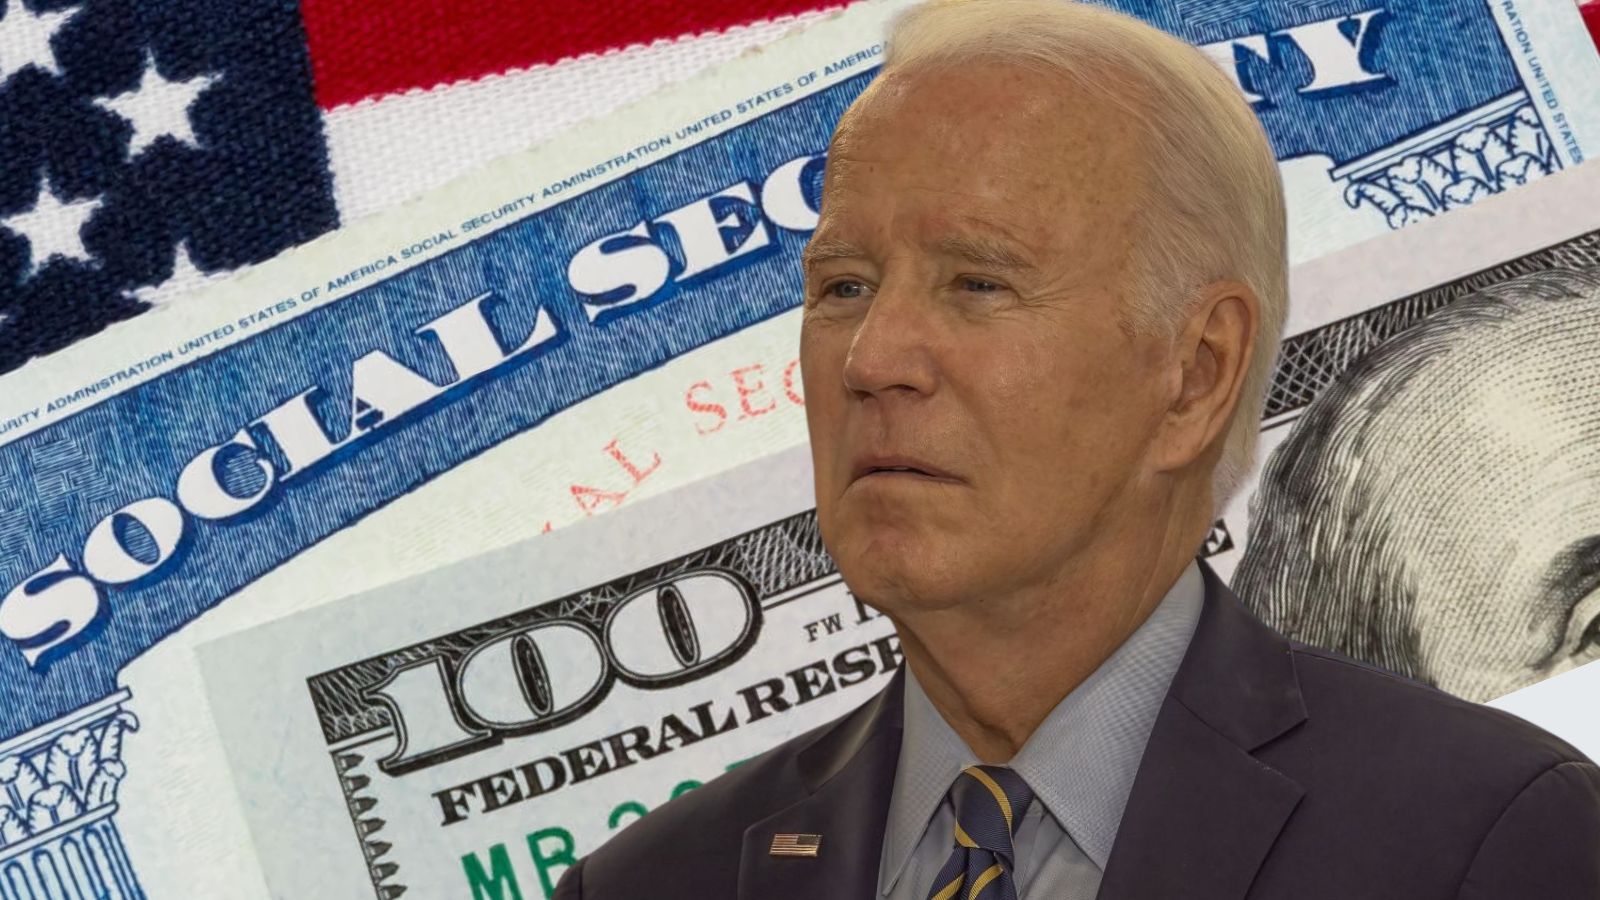 “The Reason He’s Being Demonized Is To Secure a Trump Win”: Biden’s Social Security Expansion Plan Ignites Uncertainty